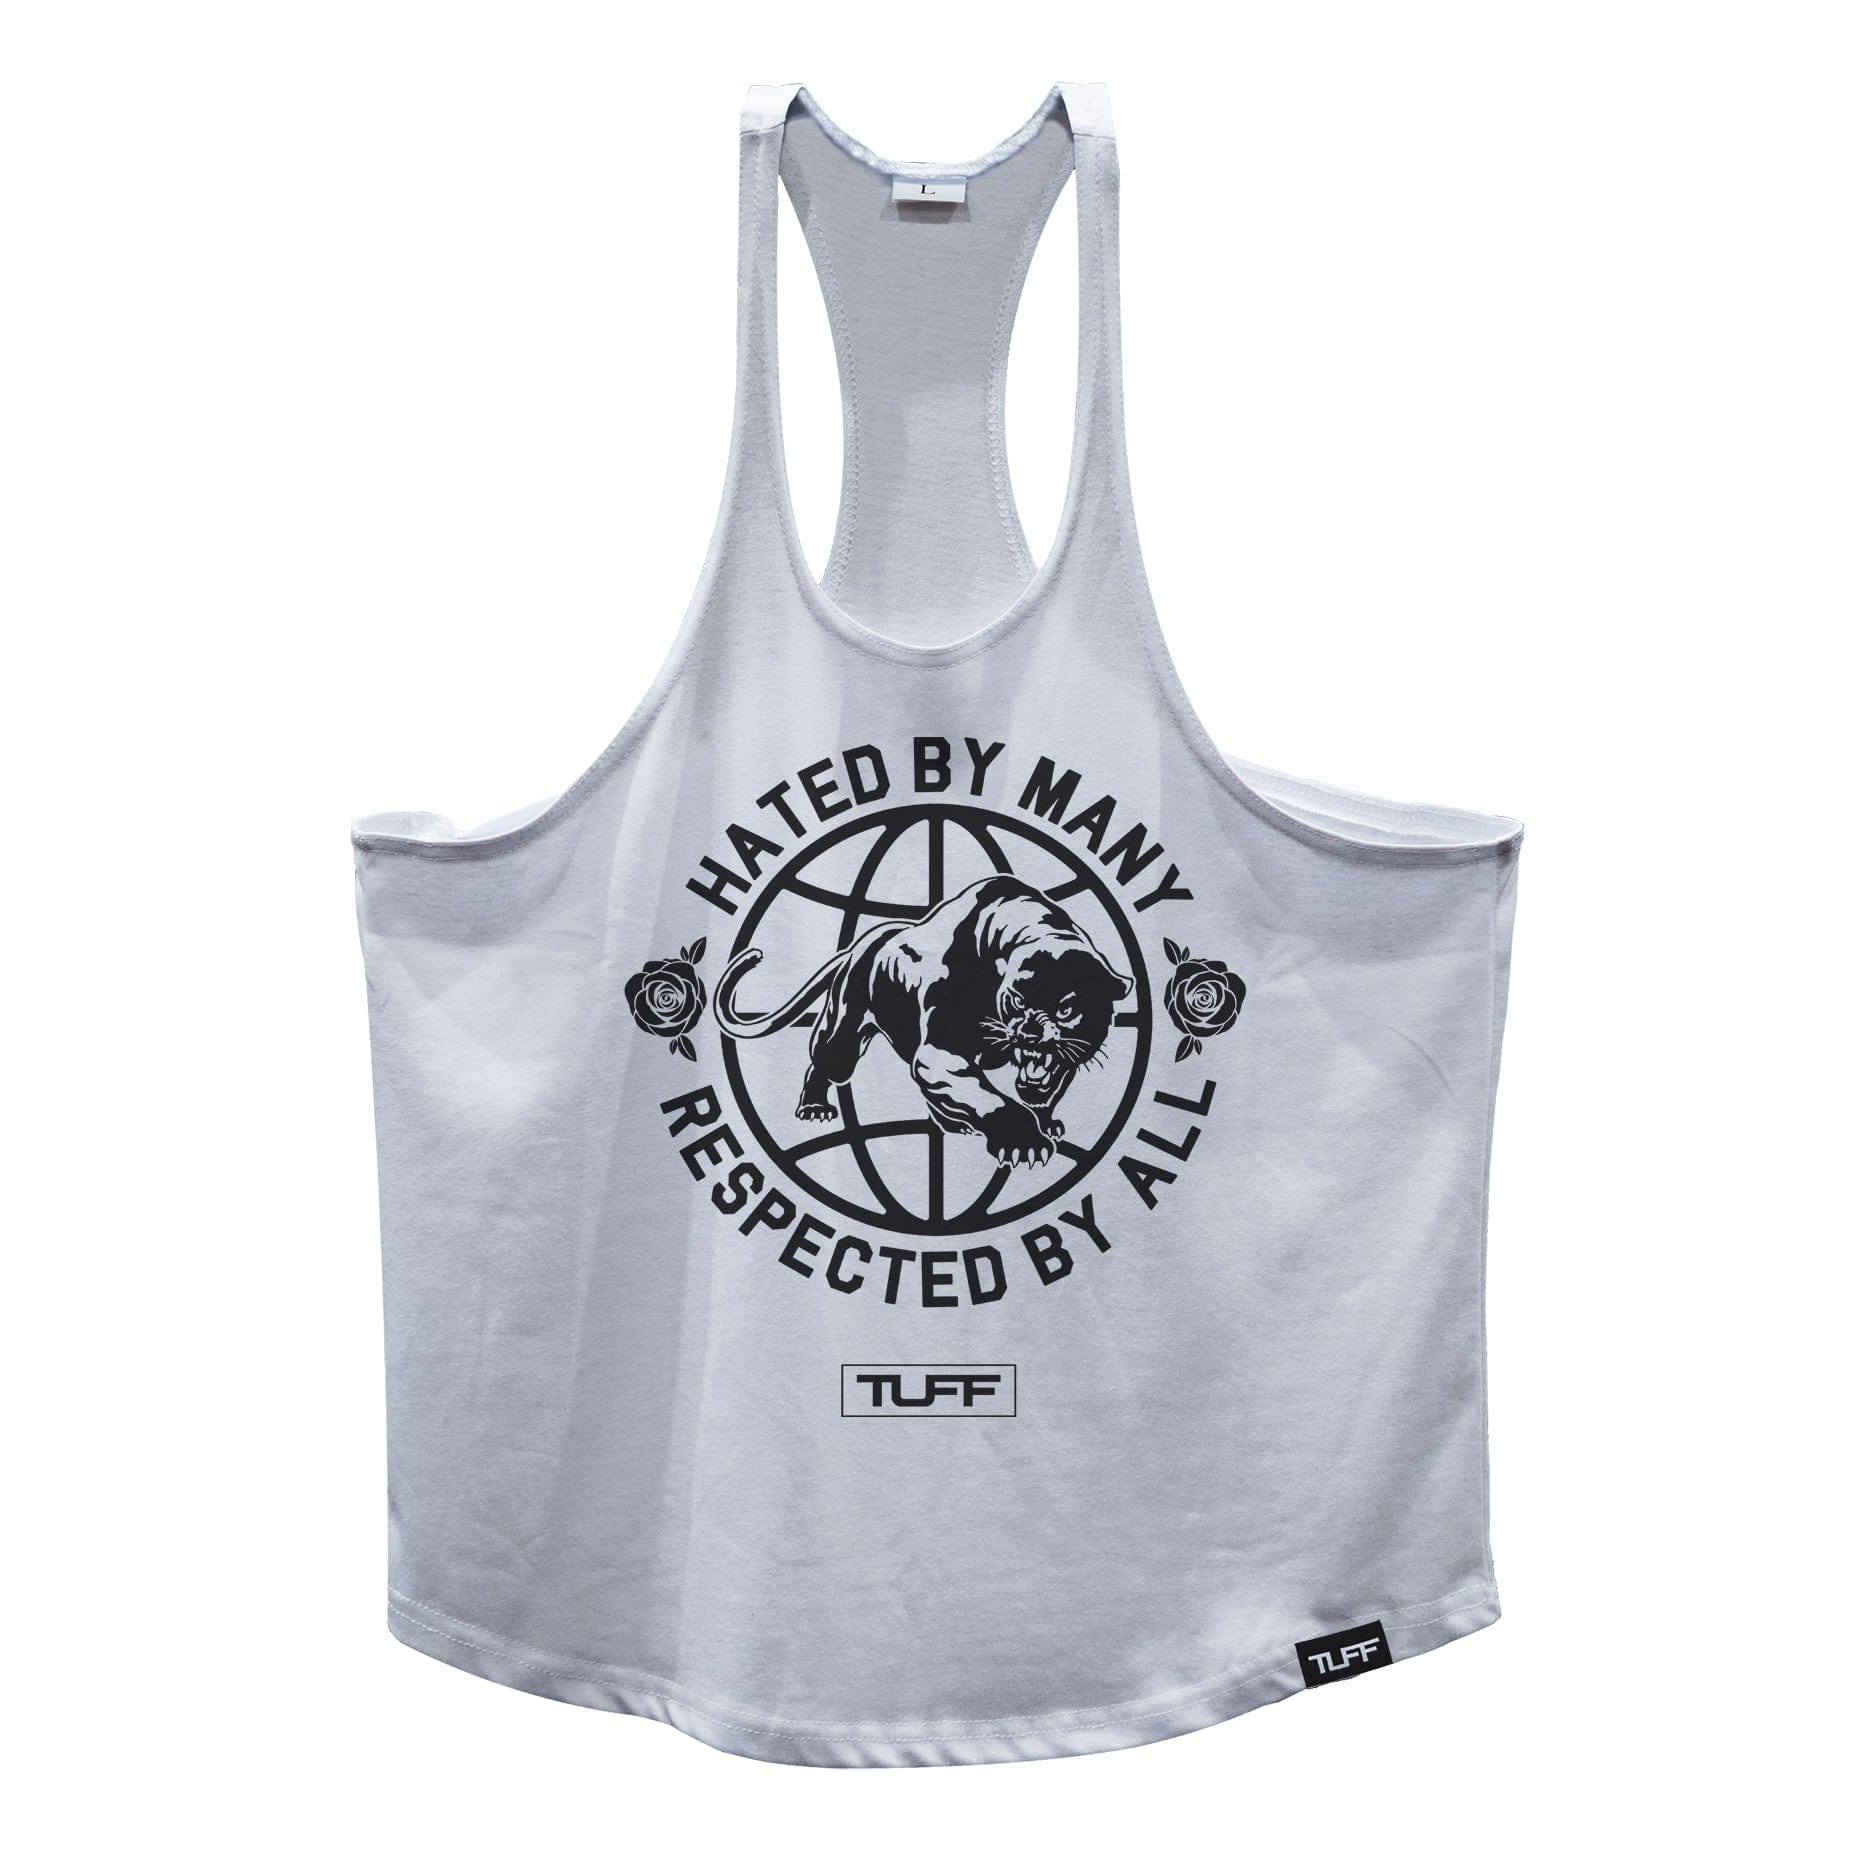 Hated By Many, Respected By All Stringer Tank Top Men's Tank Tops